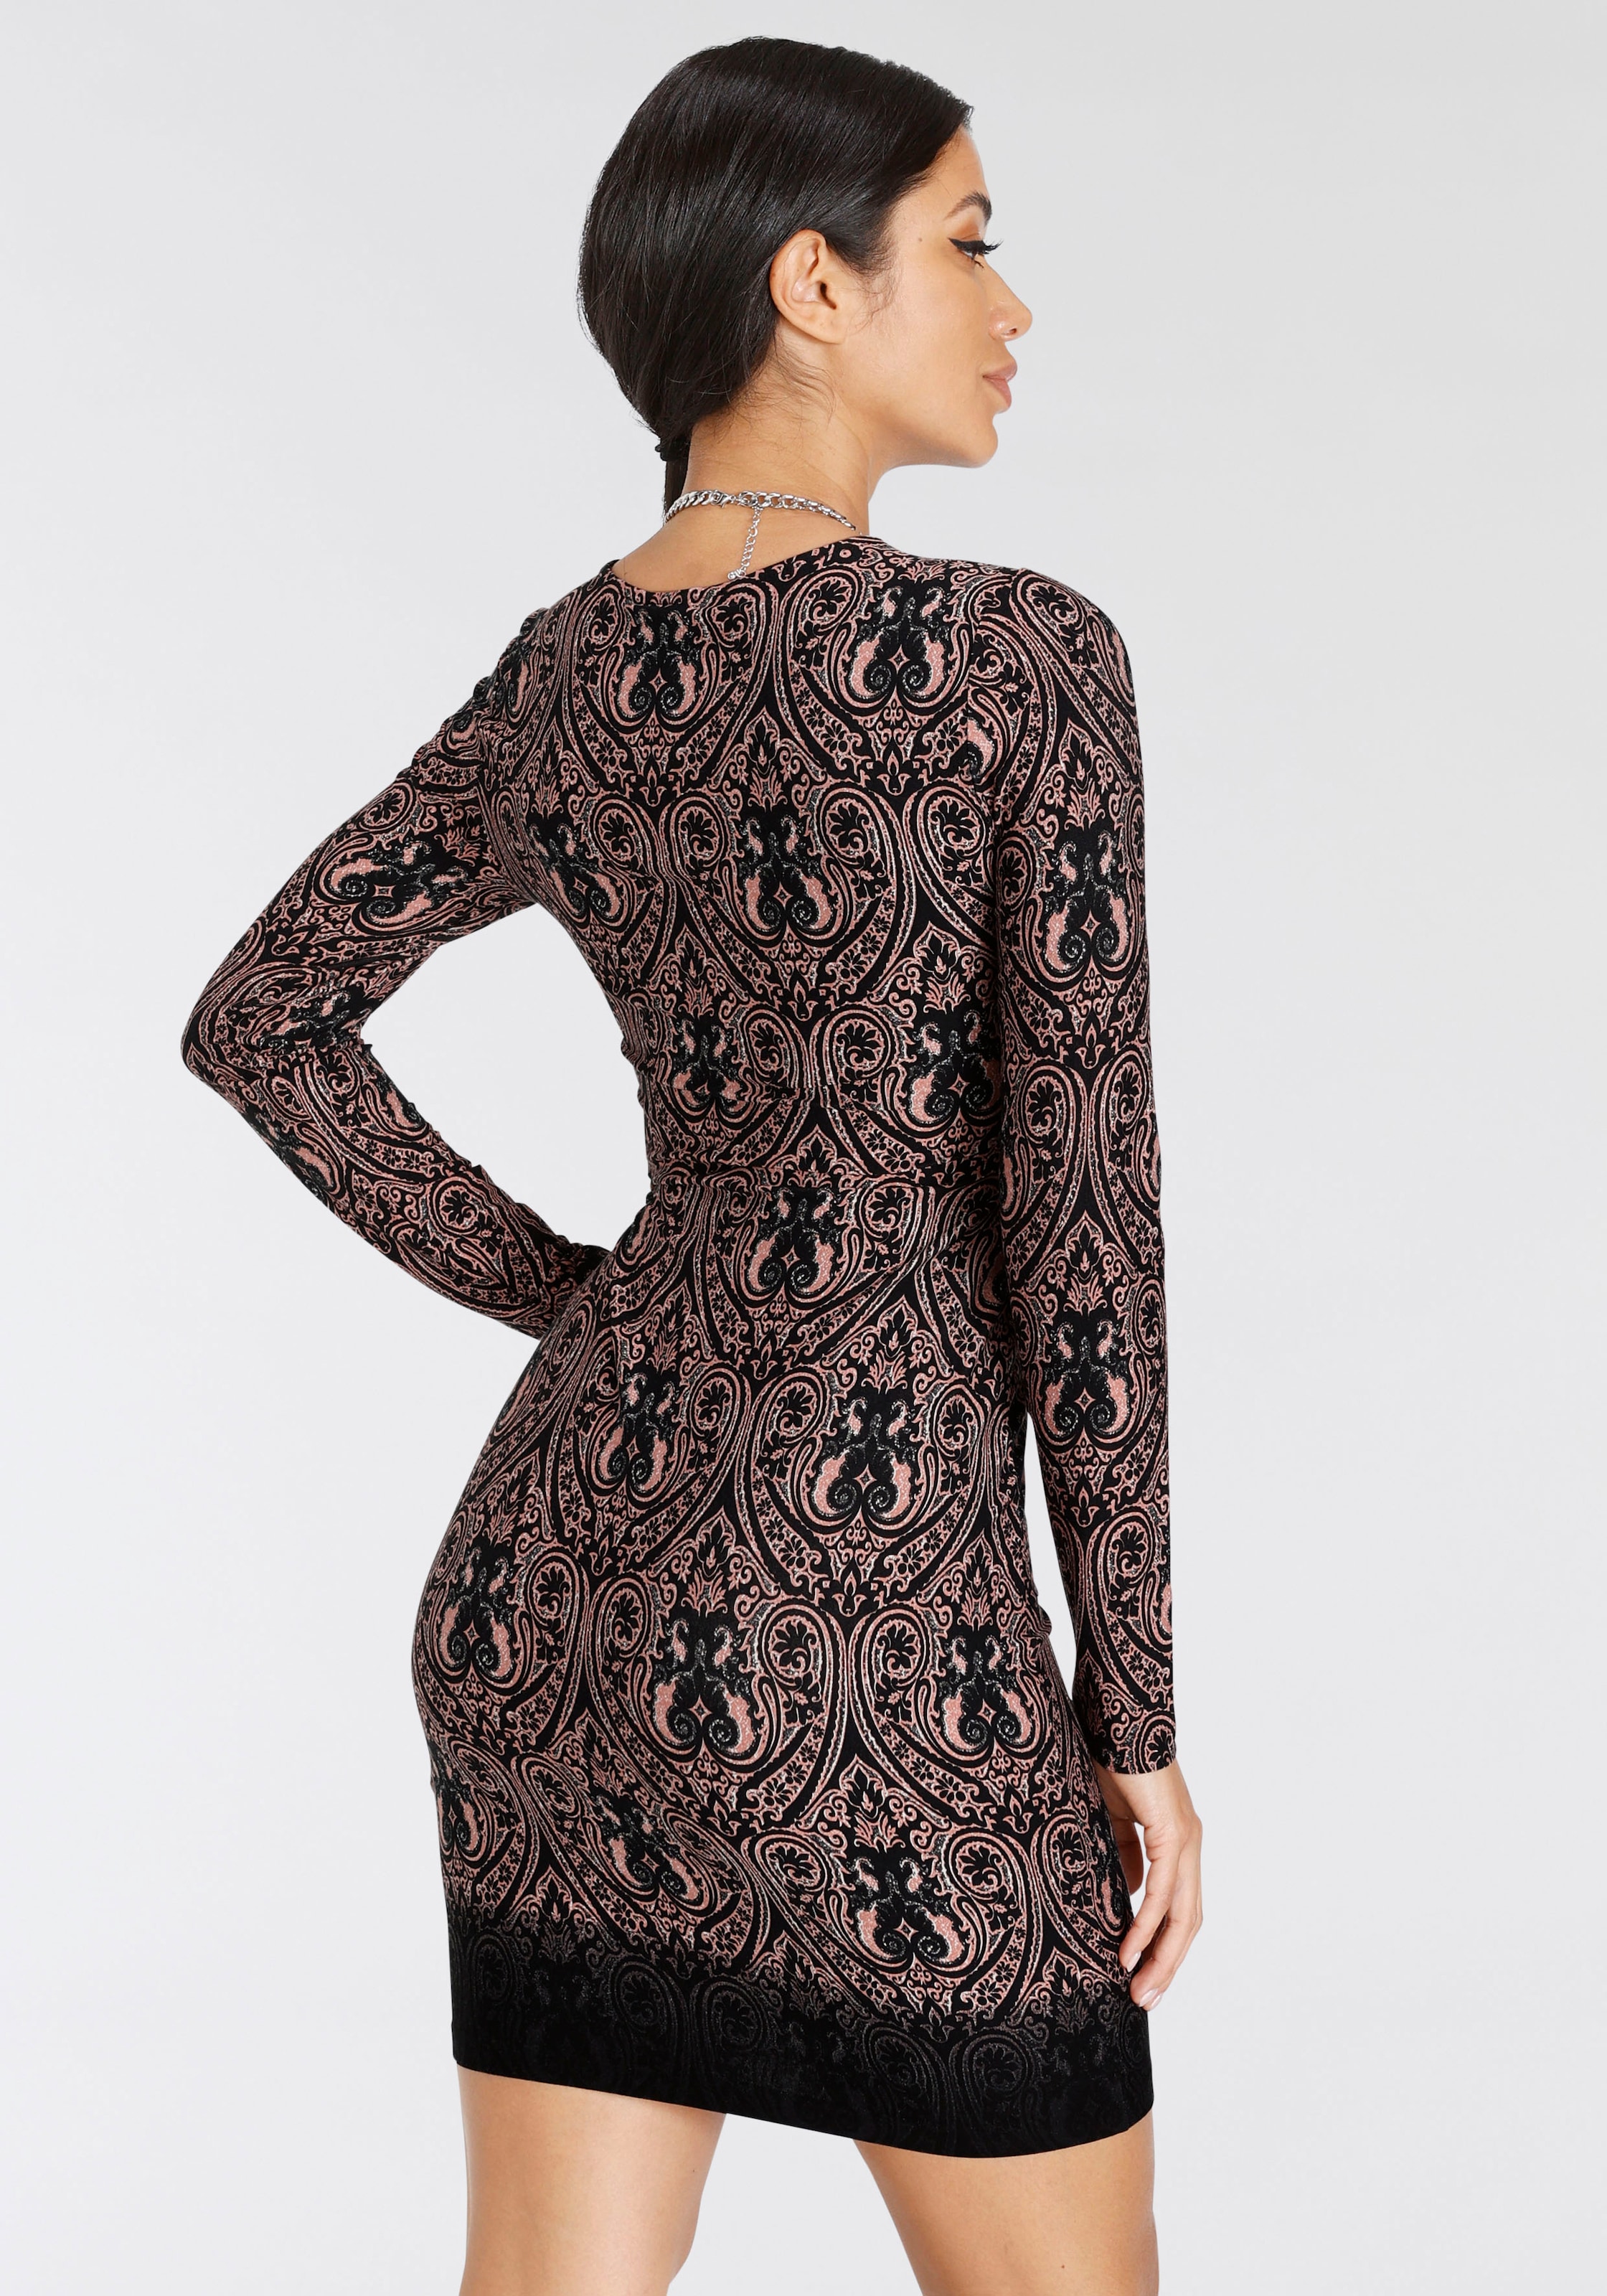 Melrose Jerseykleid, mit Cut-Out und Paisley-Muster bei ♕